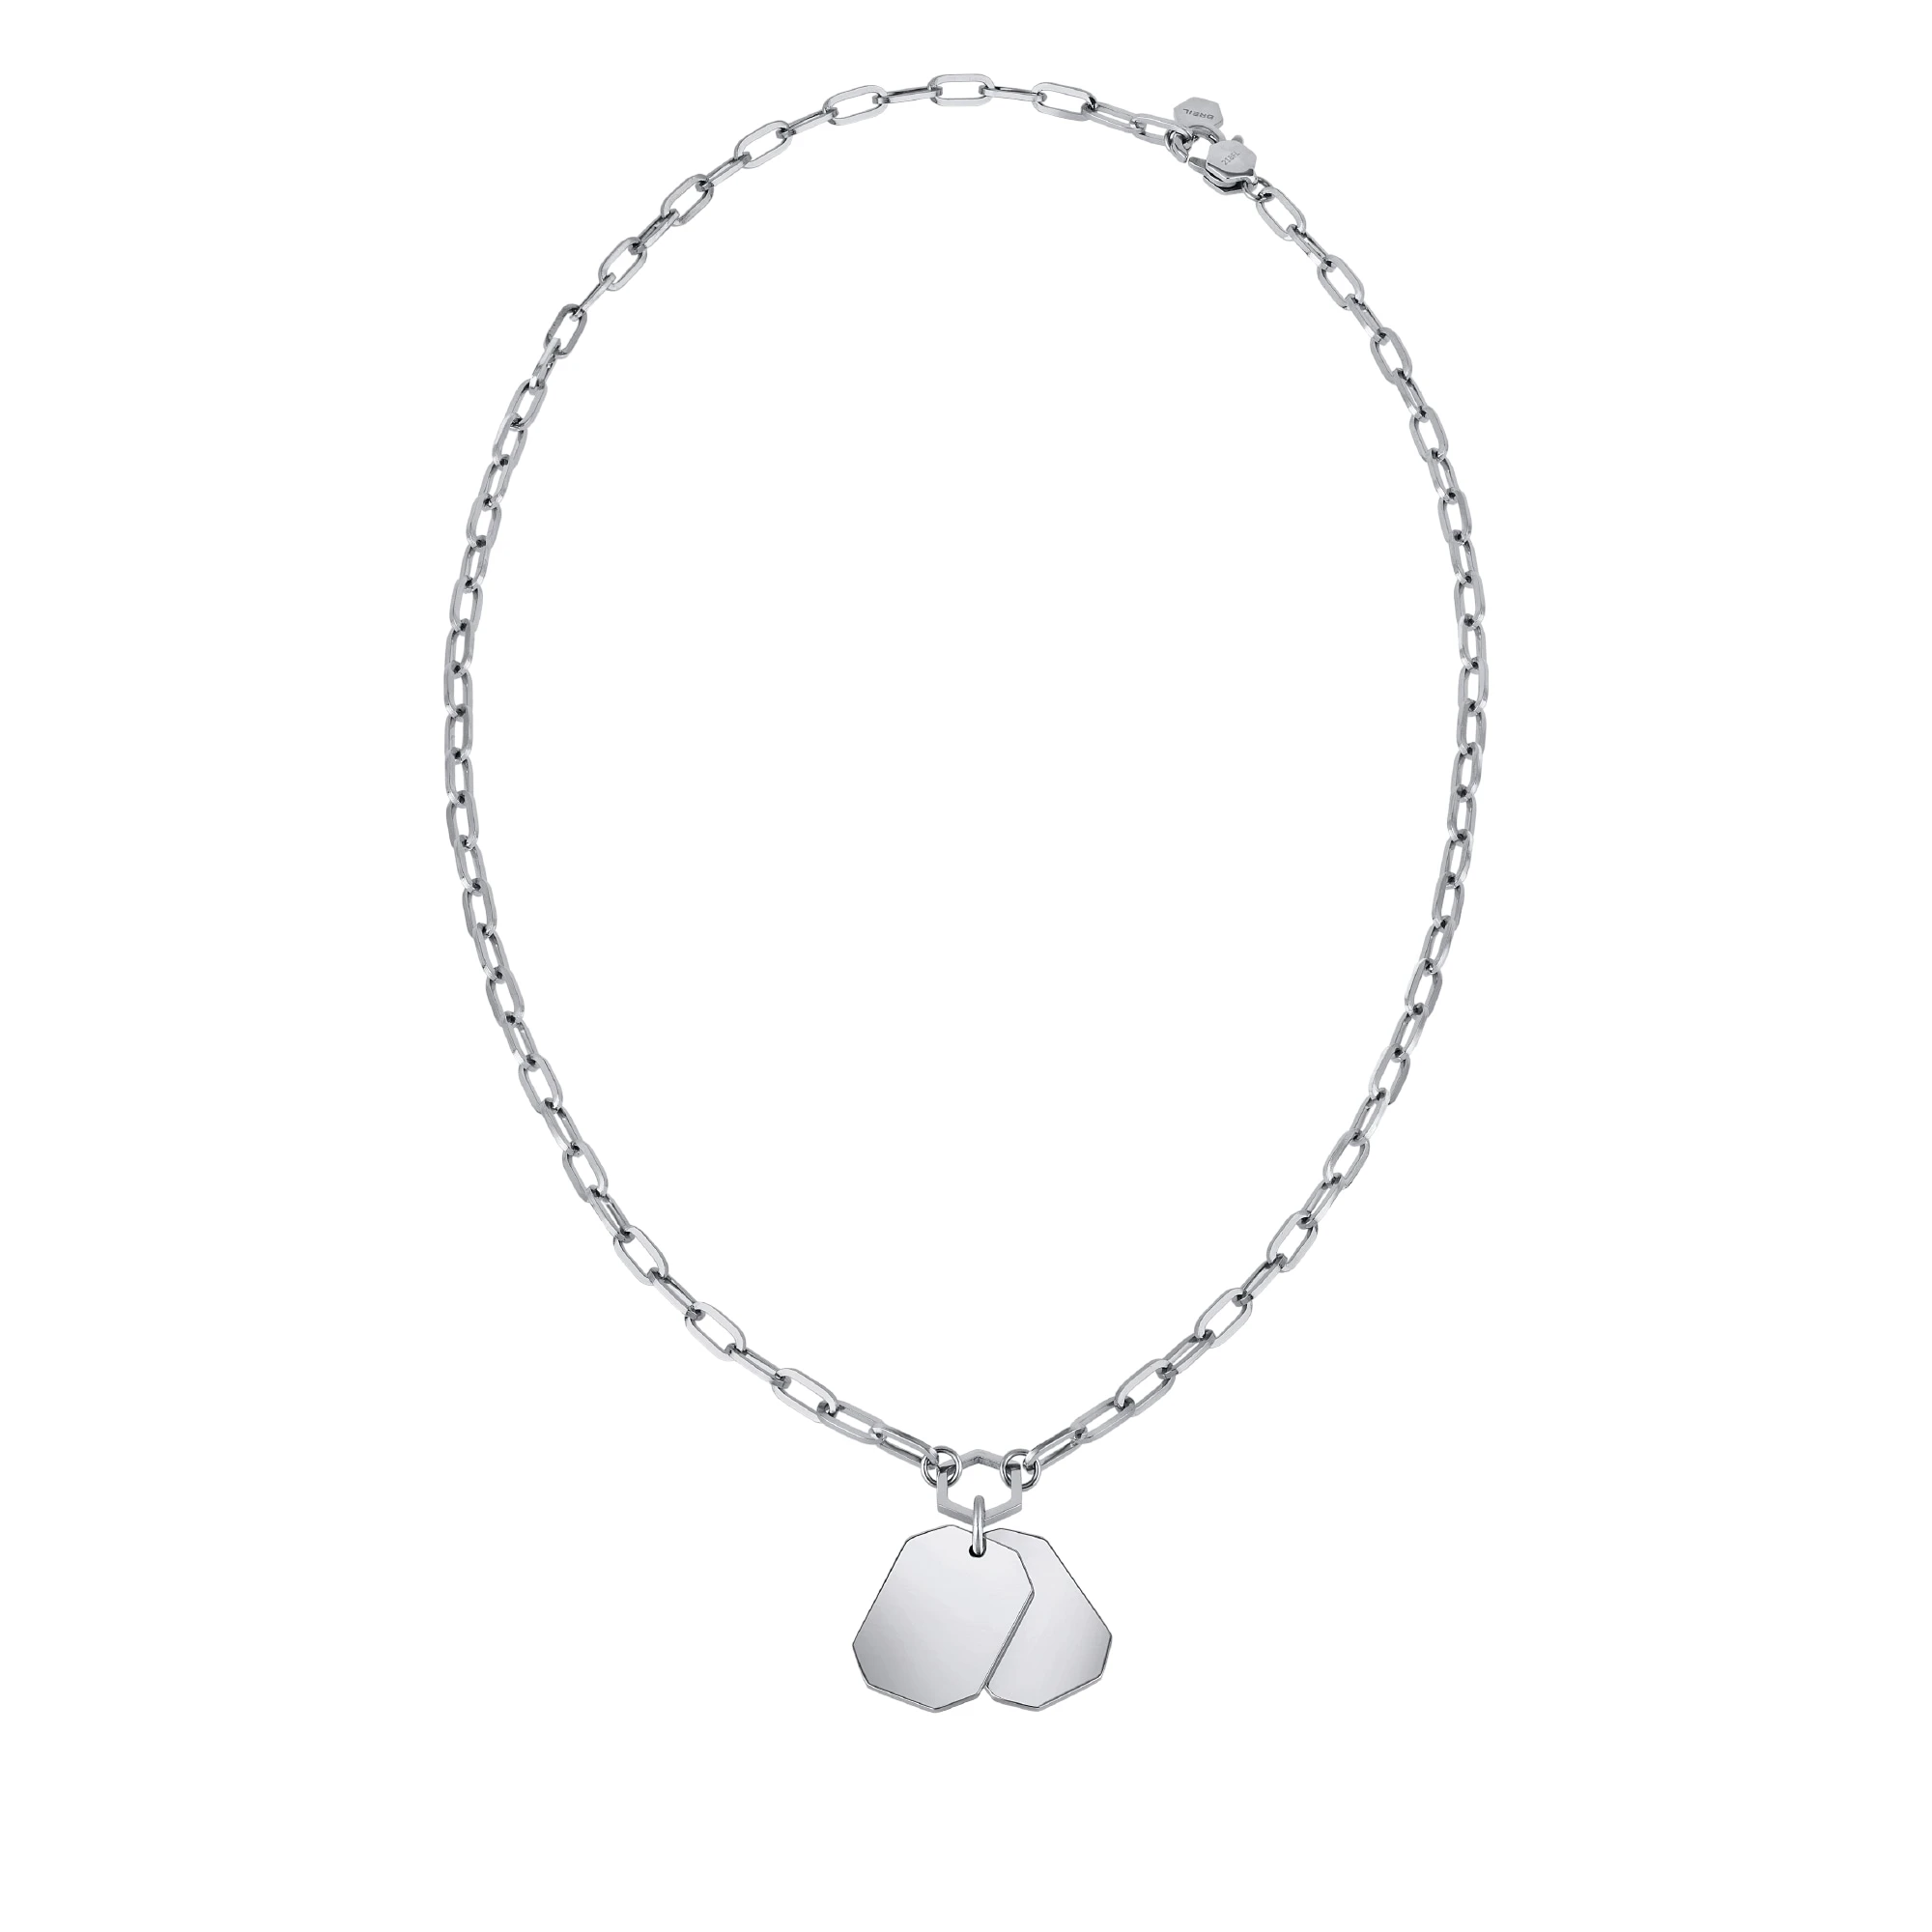 PRIVATE CODE - STAINLESS STEEL NECKLACE - 1 - TJ3121 | Breil